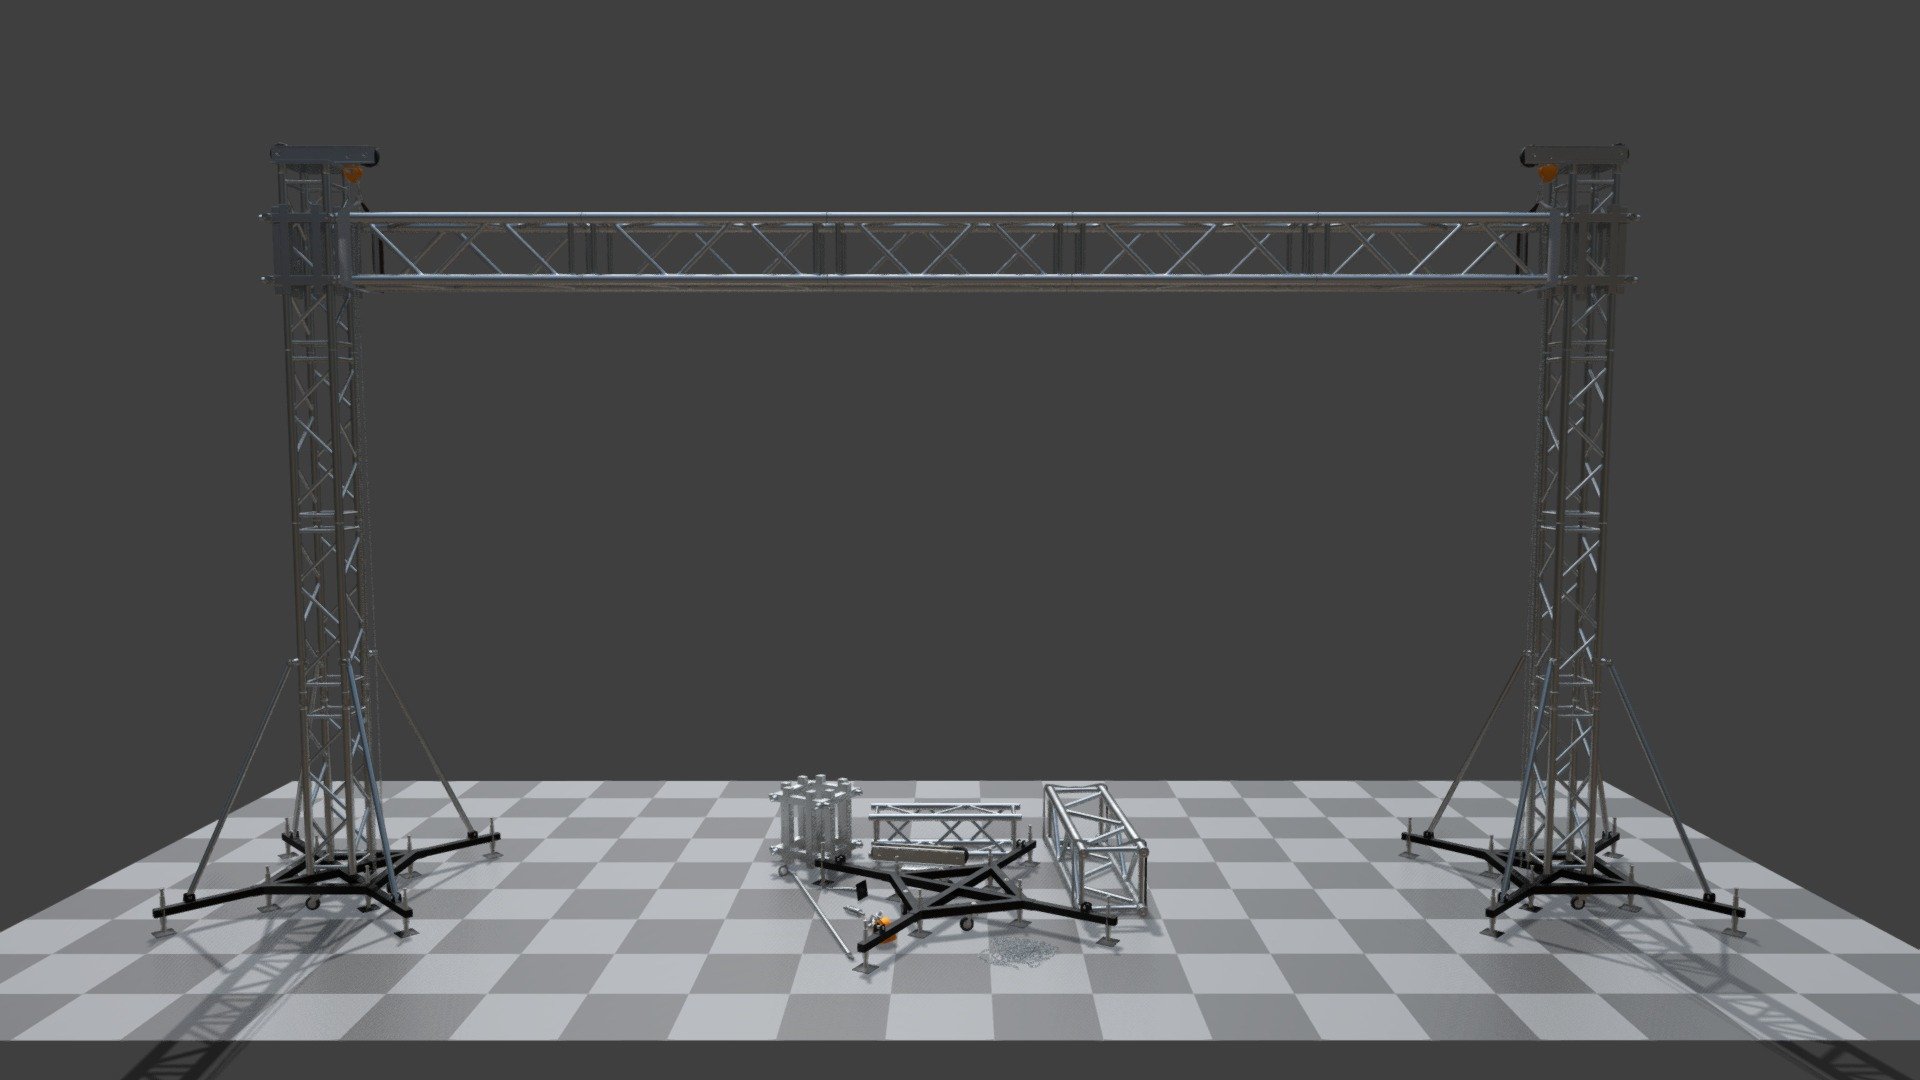 This scene truss kit consists of tileable elements sharing one 2k material. Designed for realtime applications as well as mid-distance renders.

Contents:


Tileable trusses coming in two sizes
Base support with customizable area and outriggers
Sleeve block
Top pulley with chain hoist
Connectors, belts, hooks, chains
 - Scene Truss Kit - 3D model by Damir Guliev (@dgul) 3d model